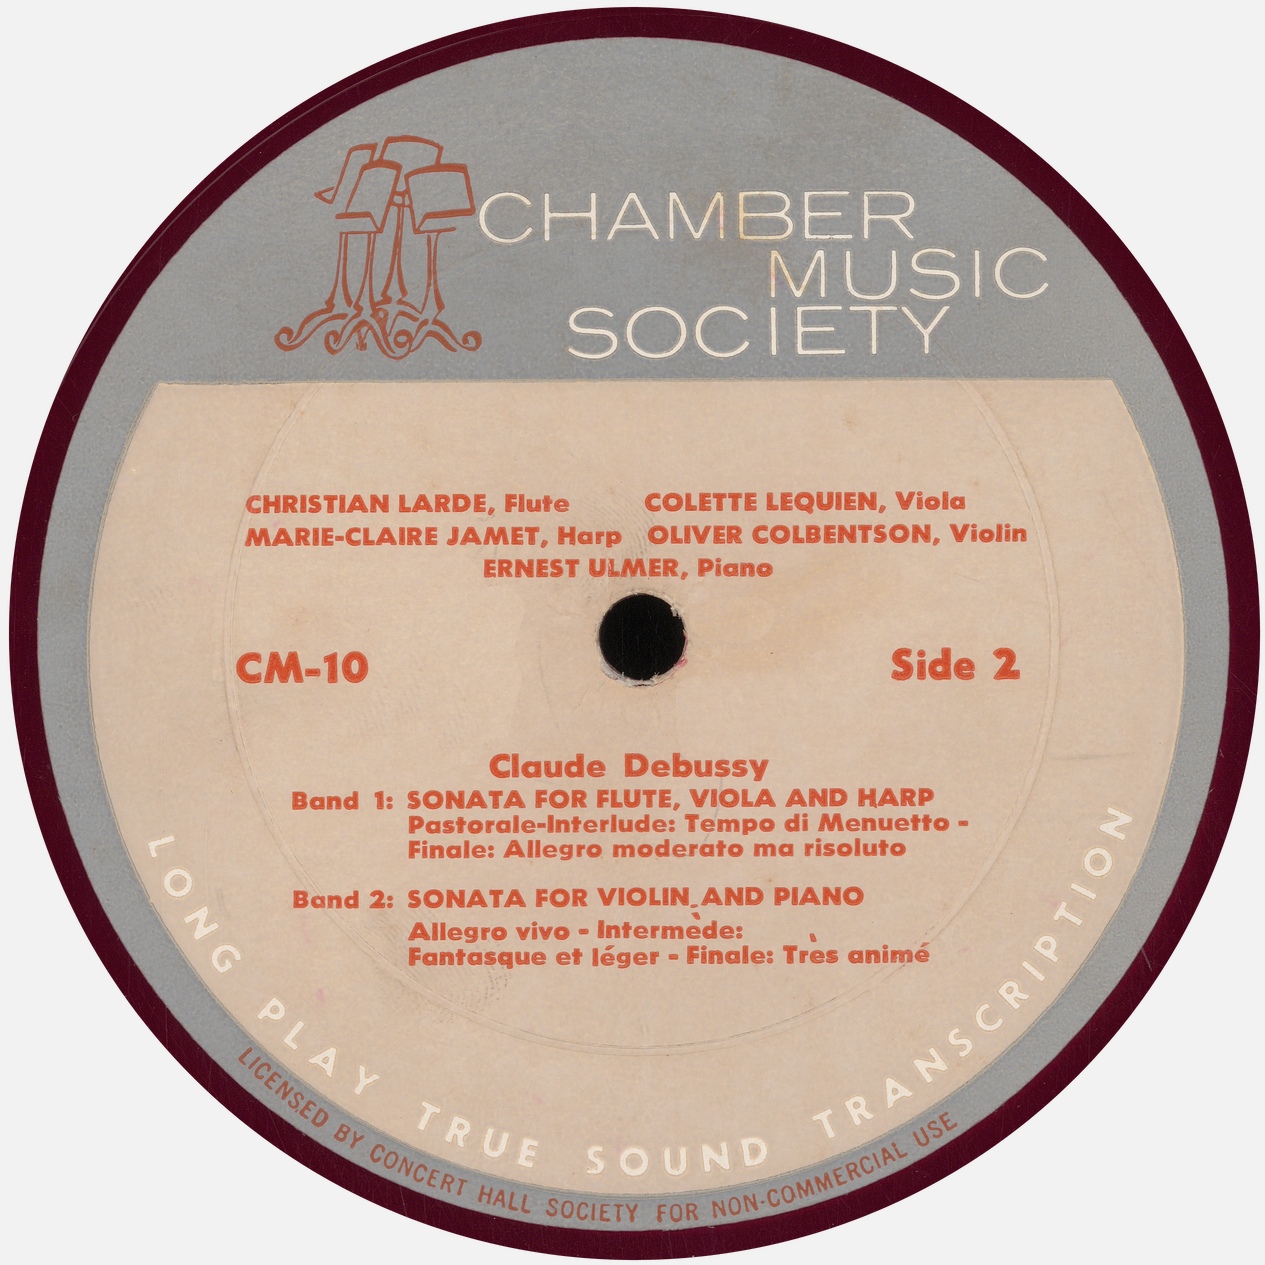 Étiquette verso du disque «Chamber Music Society» CM-10